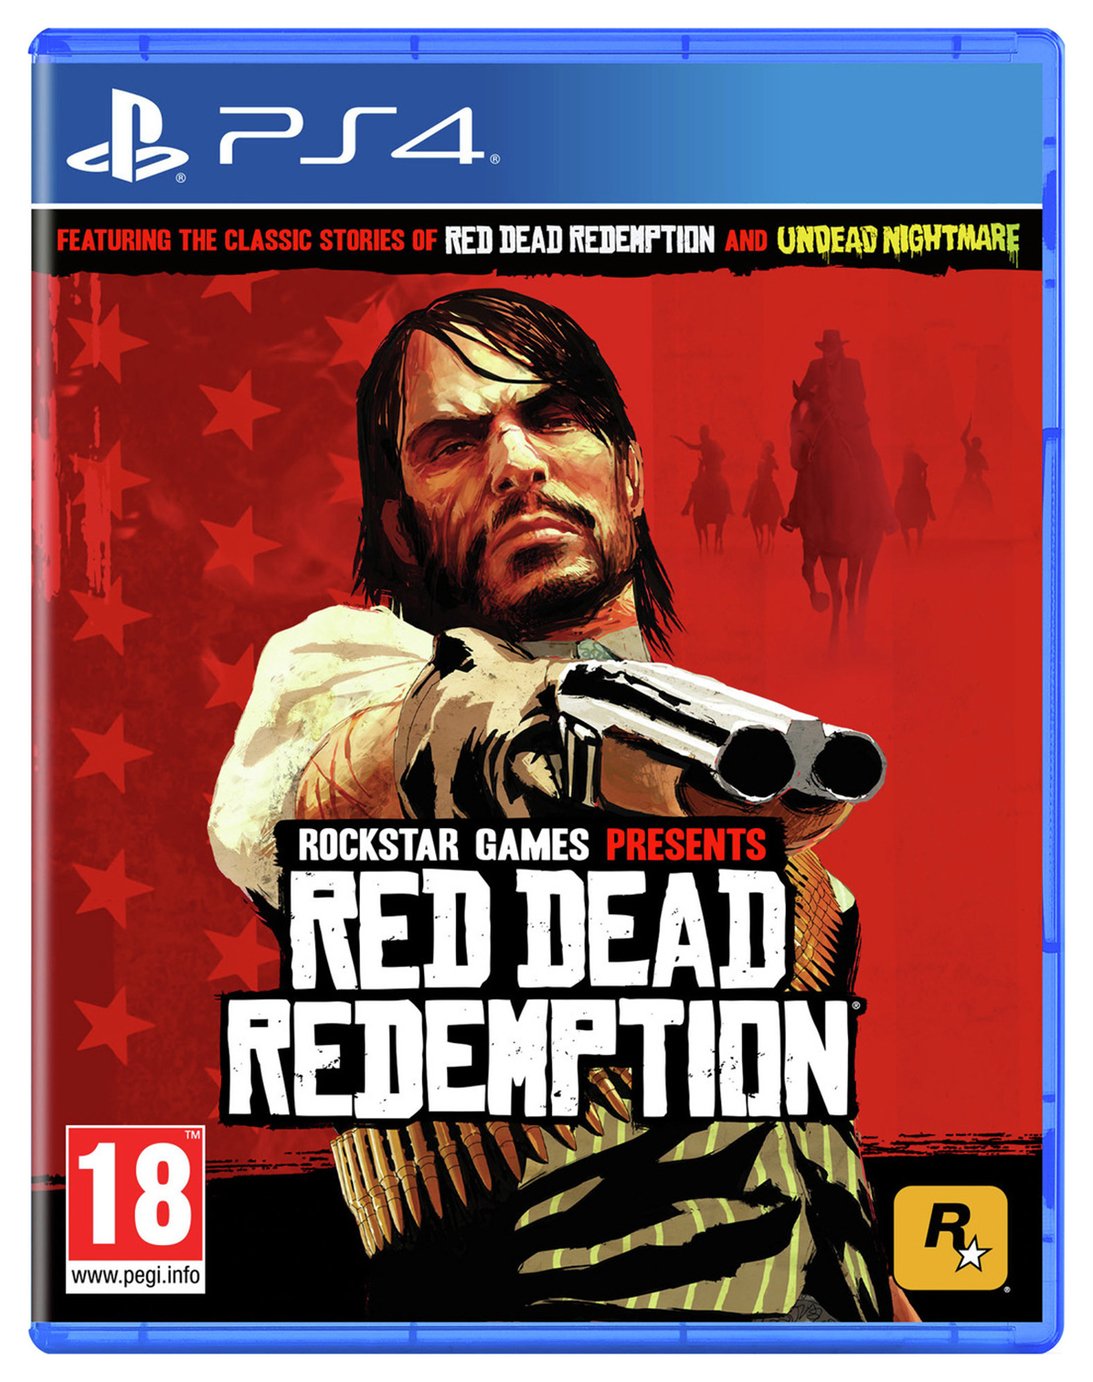 Red Dead Redemption PS4 Game